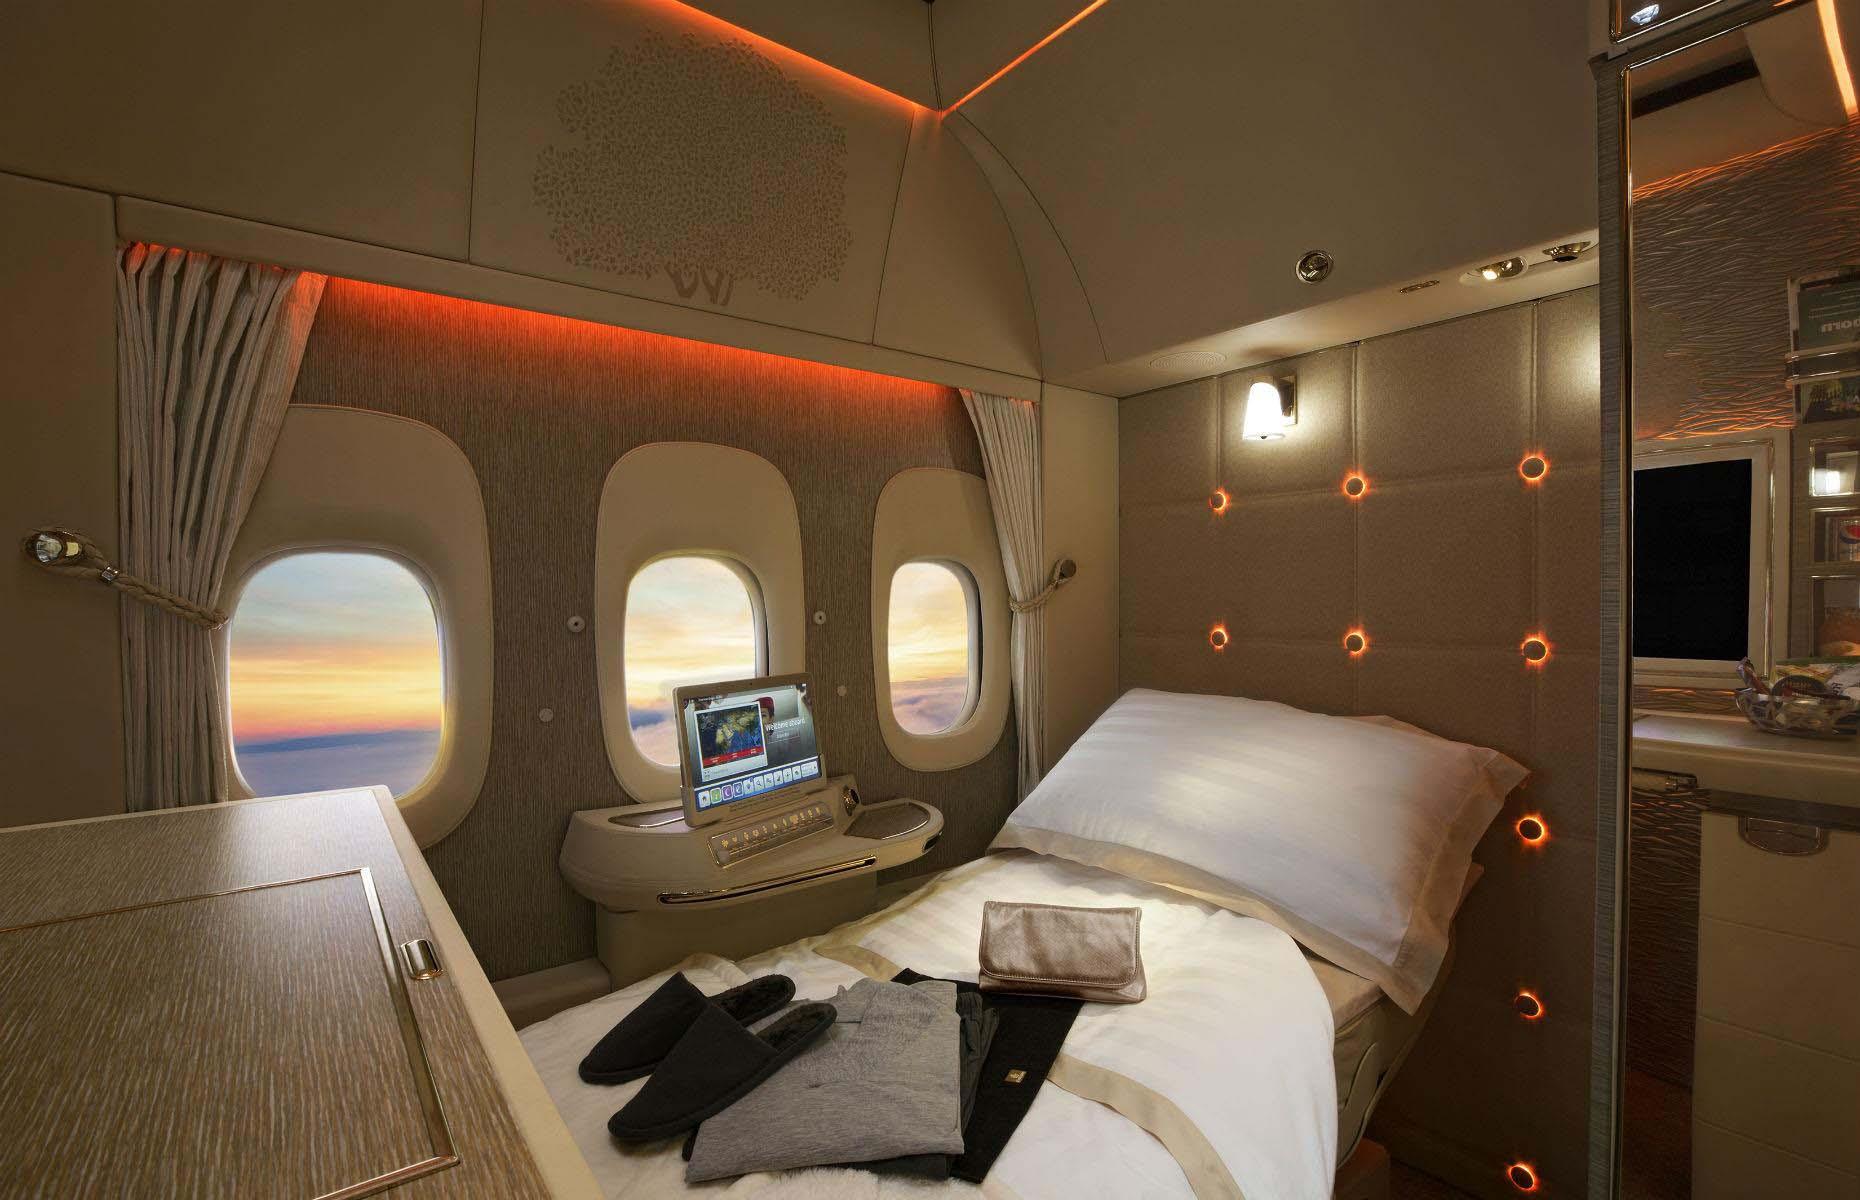 The A380's size makes it a much smoother flight for passengers. The plane has over 5,000 square feet (465sqm) of floor space and those lucky enough to travel in first class can expect full-on bedrooms, with plush mattresses and en suite toilets. The A380 is also the only plane in the world to have a working shower.